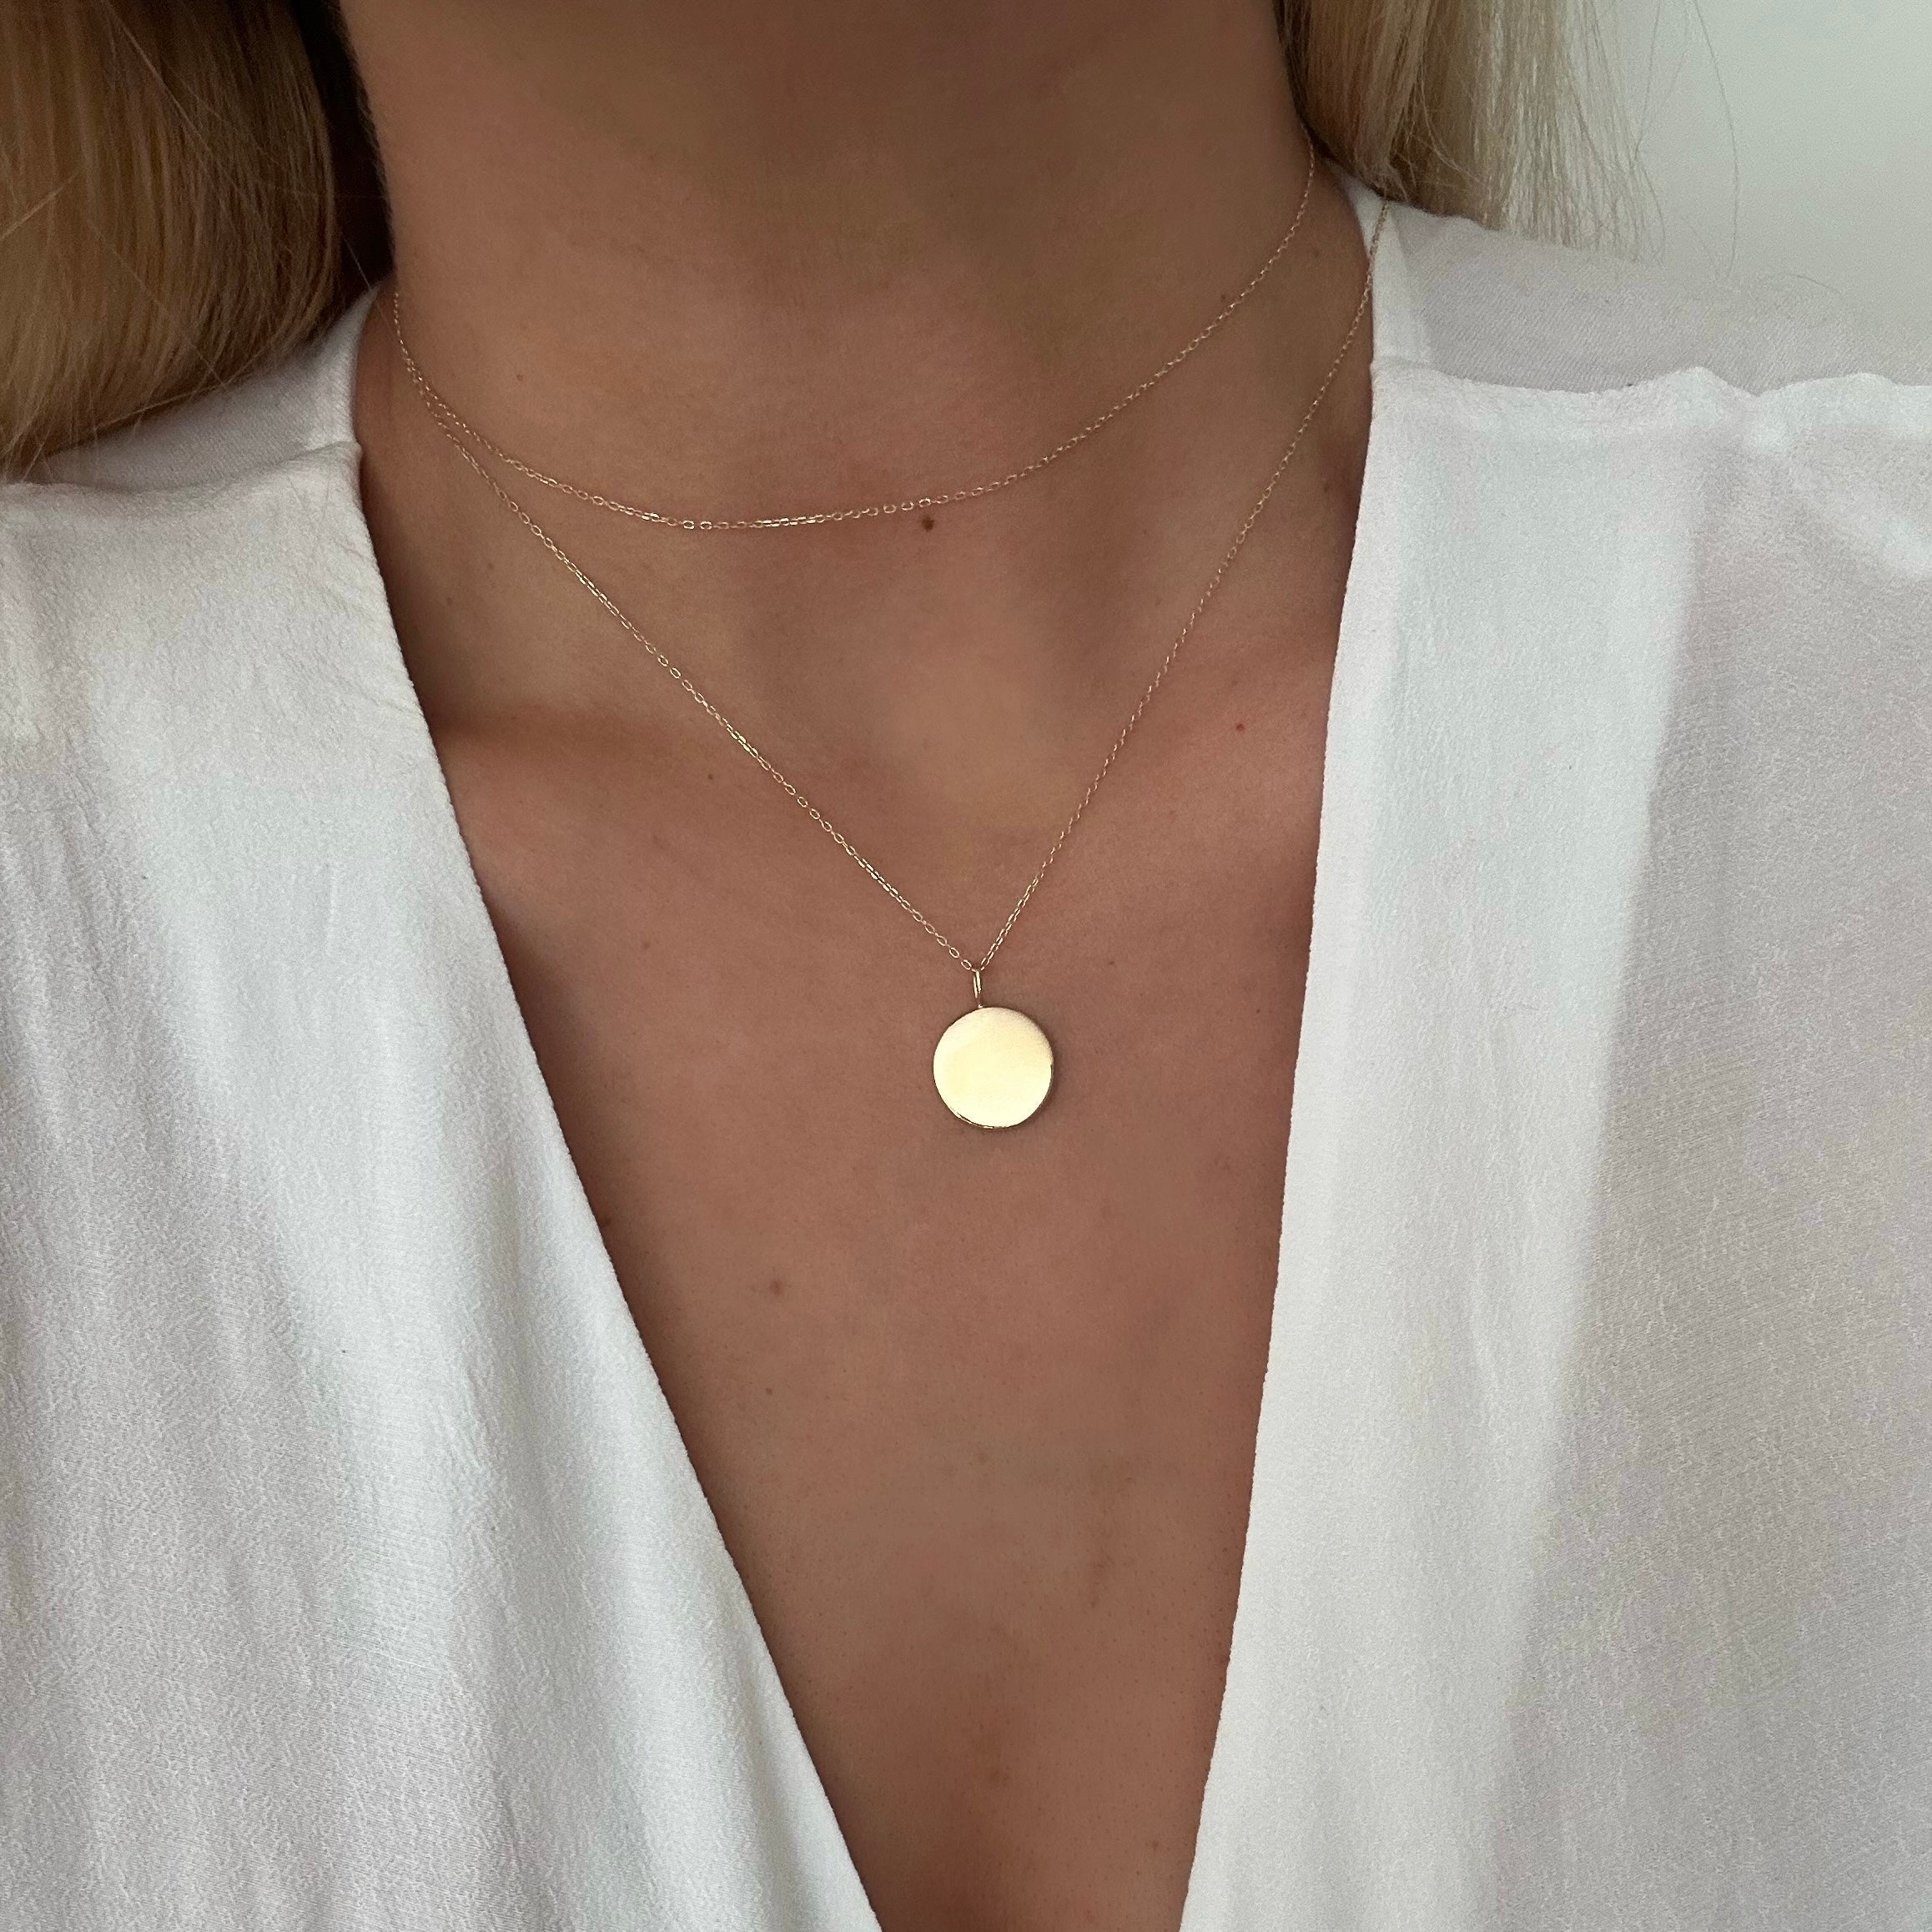 Showcase your unique style with our 18k gold vermeil, engravable coin necklace, a luxury jewelry piece that's perfect for personalization. An opulent canvas for your Danibydsgn custom logo design engraving. This necklace is not just a jewelry but a memorial keepsake that's as unique as you are. This engravable necklace is a significant addition to any collection, providing a personalized touch with your chosen meaningful design and also makes an extra special personalized gift. 